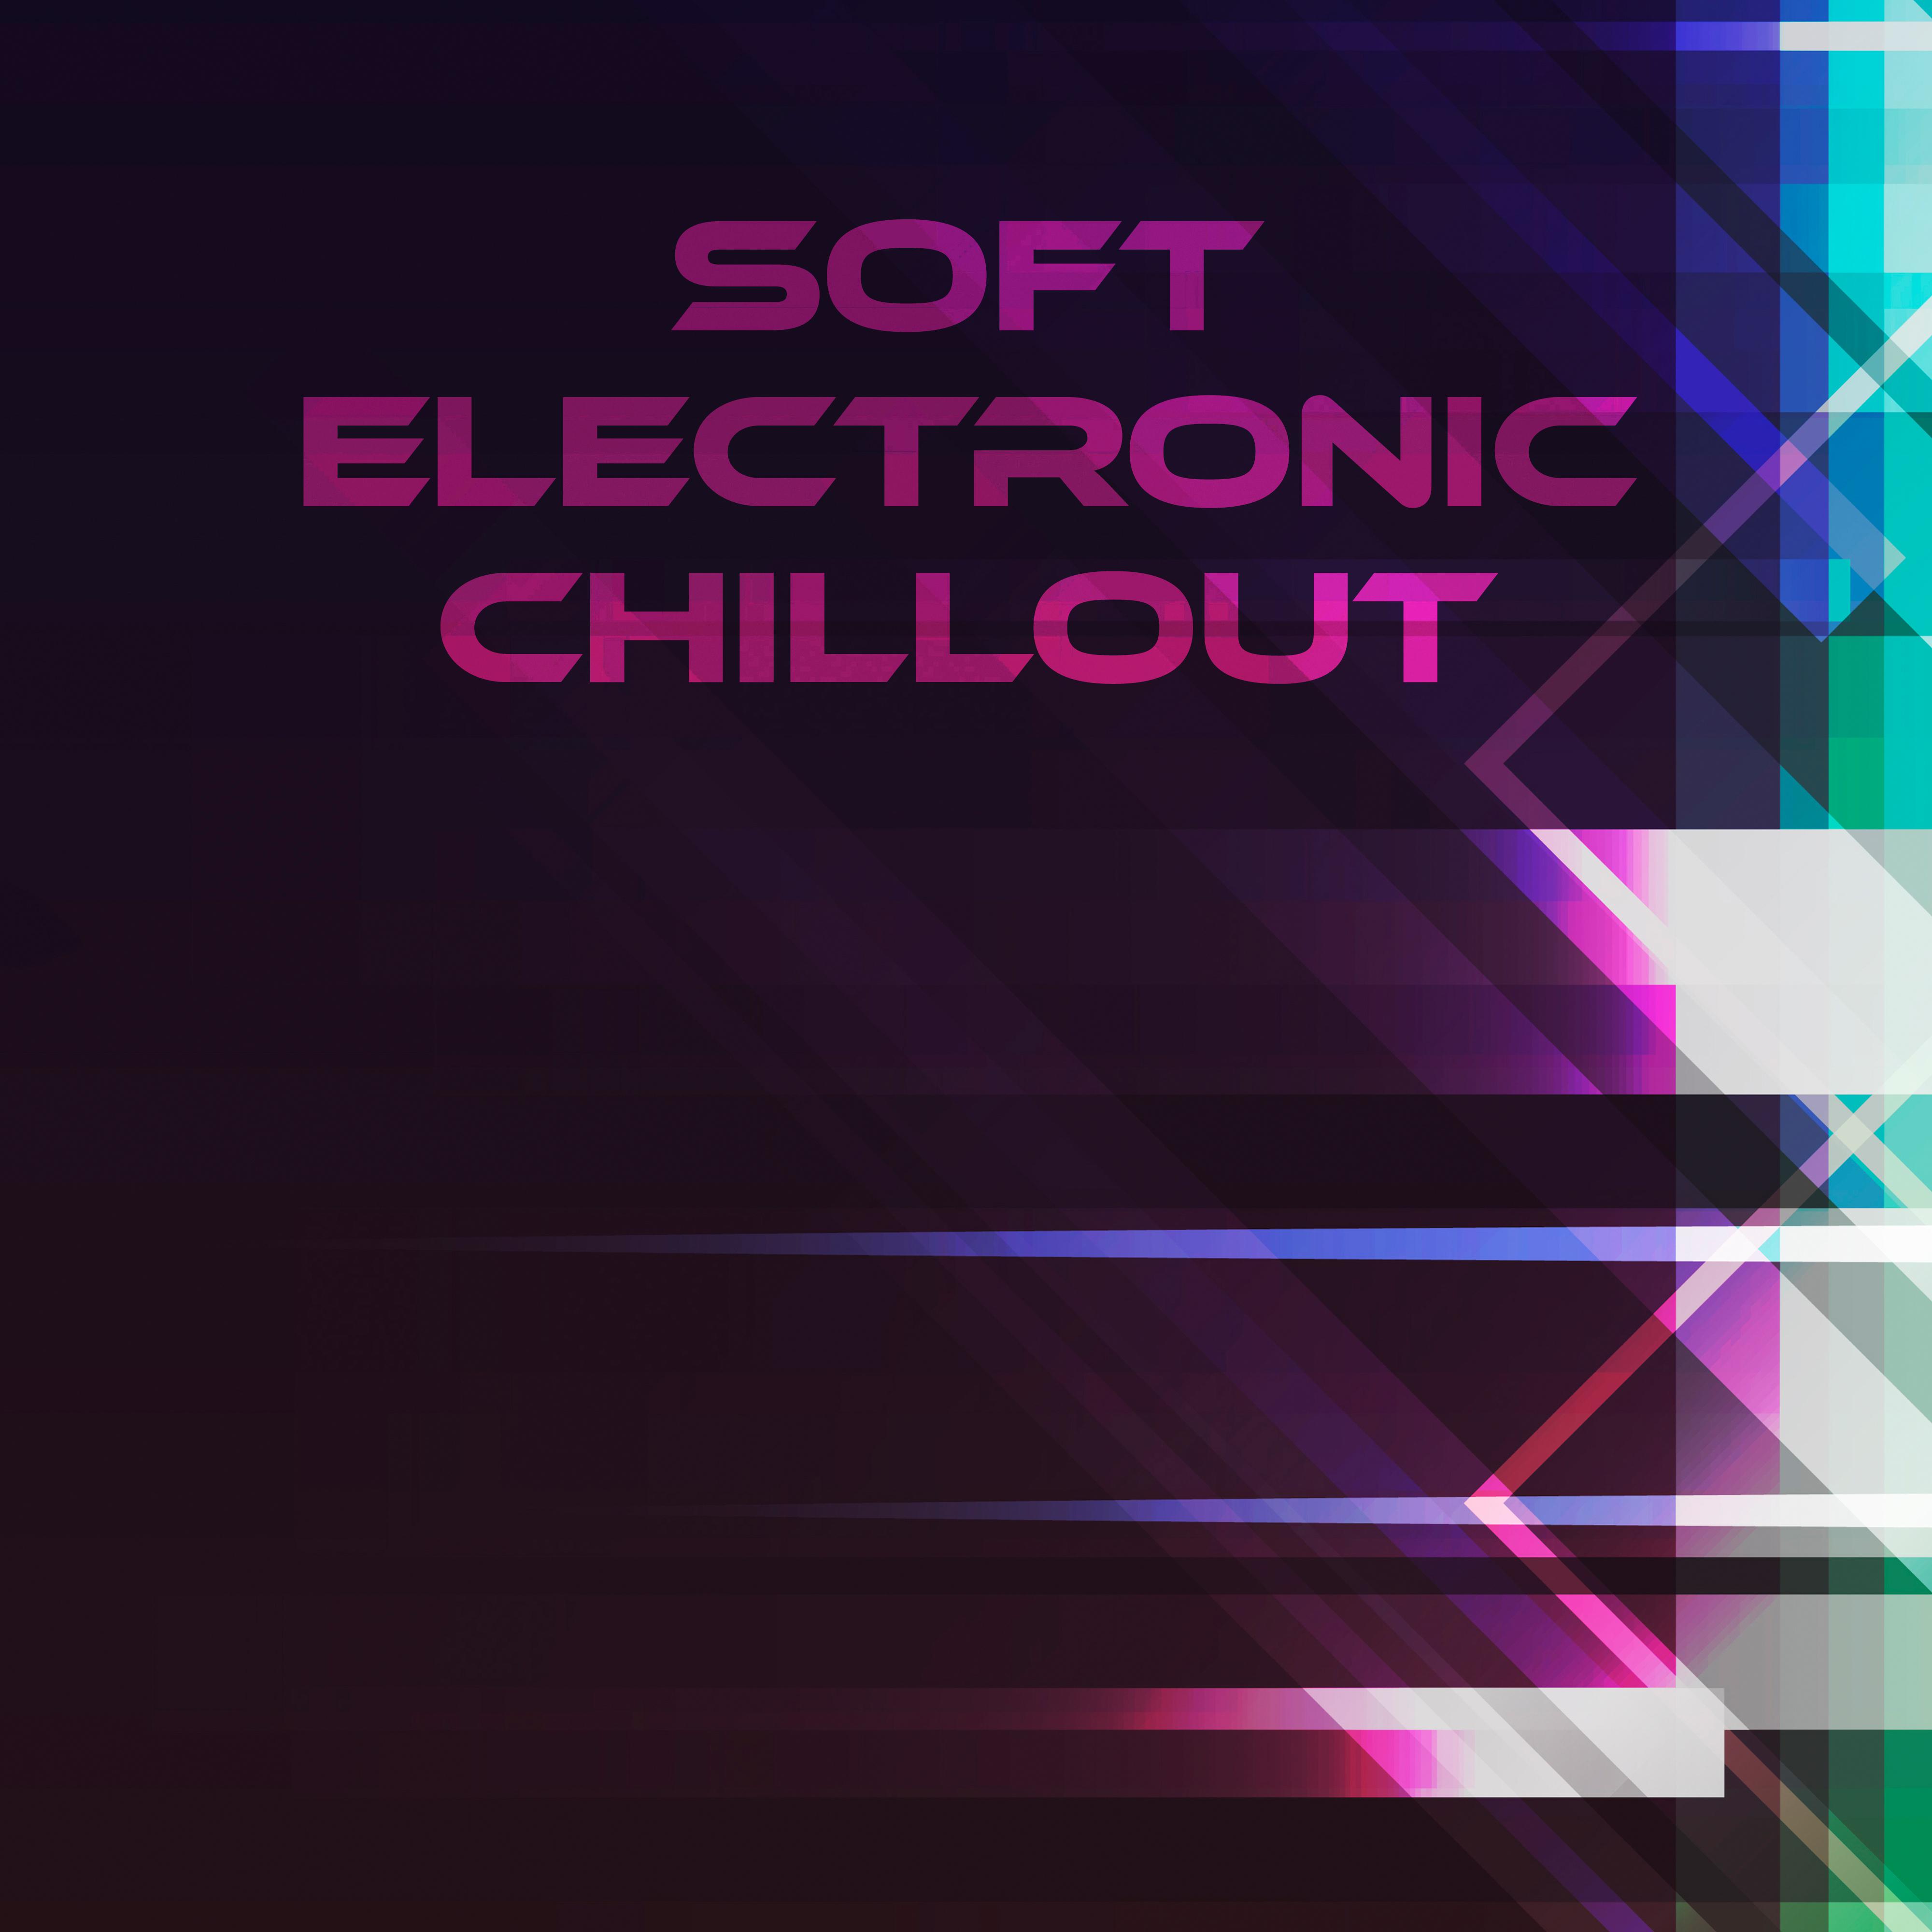 Soft Electronic Chillout - House Melodies to Relax and Repose, Calm Down and Stress Relief